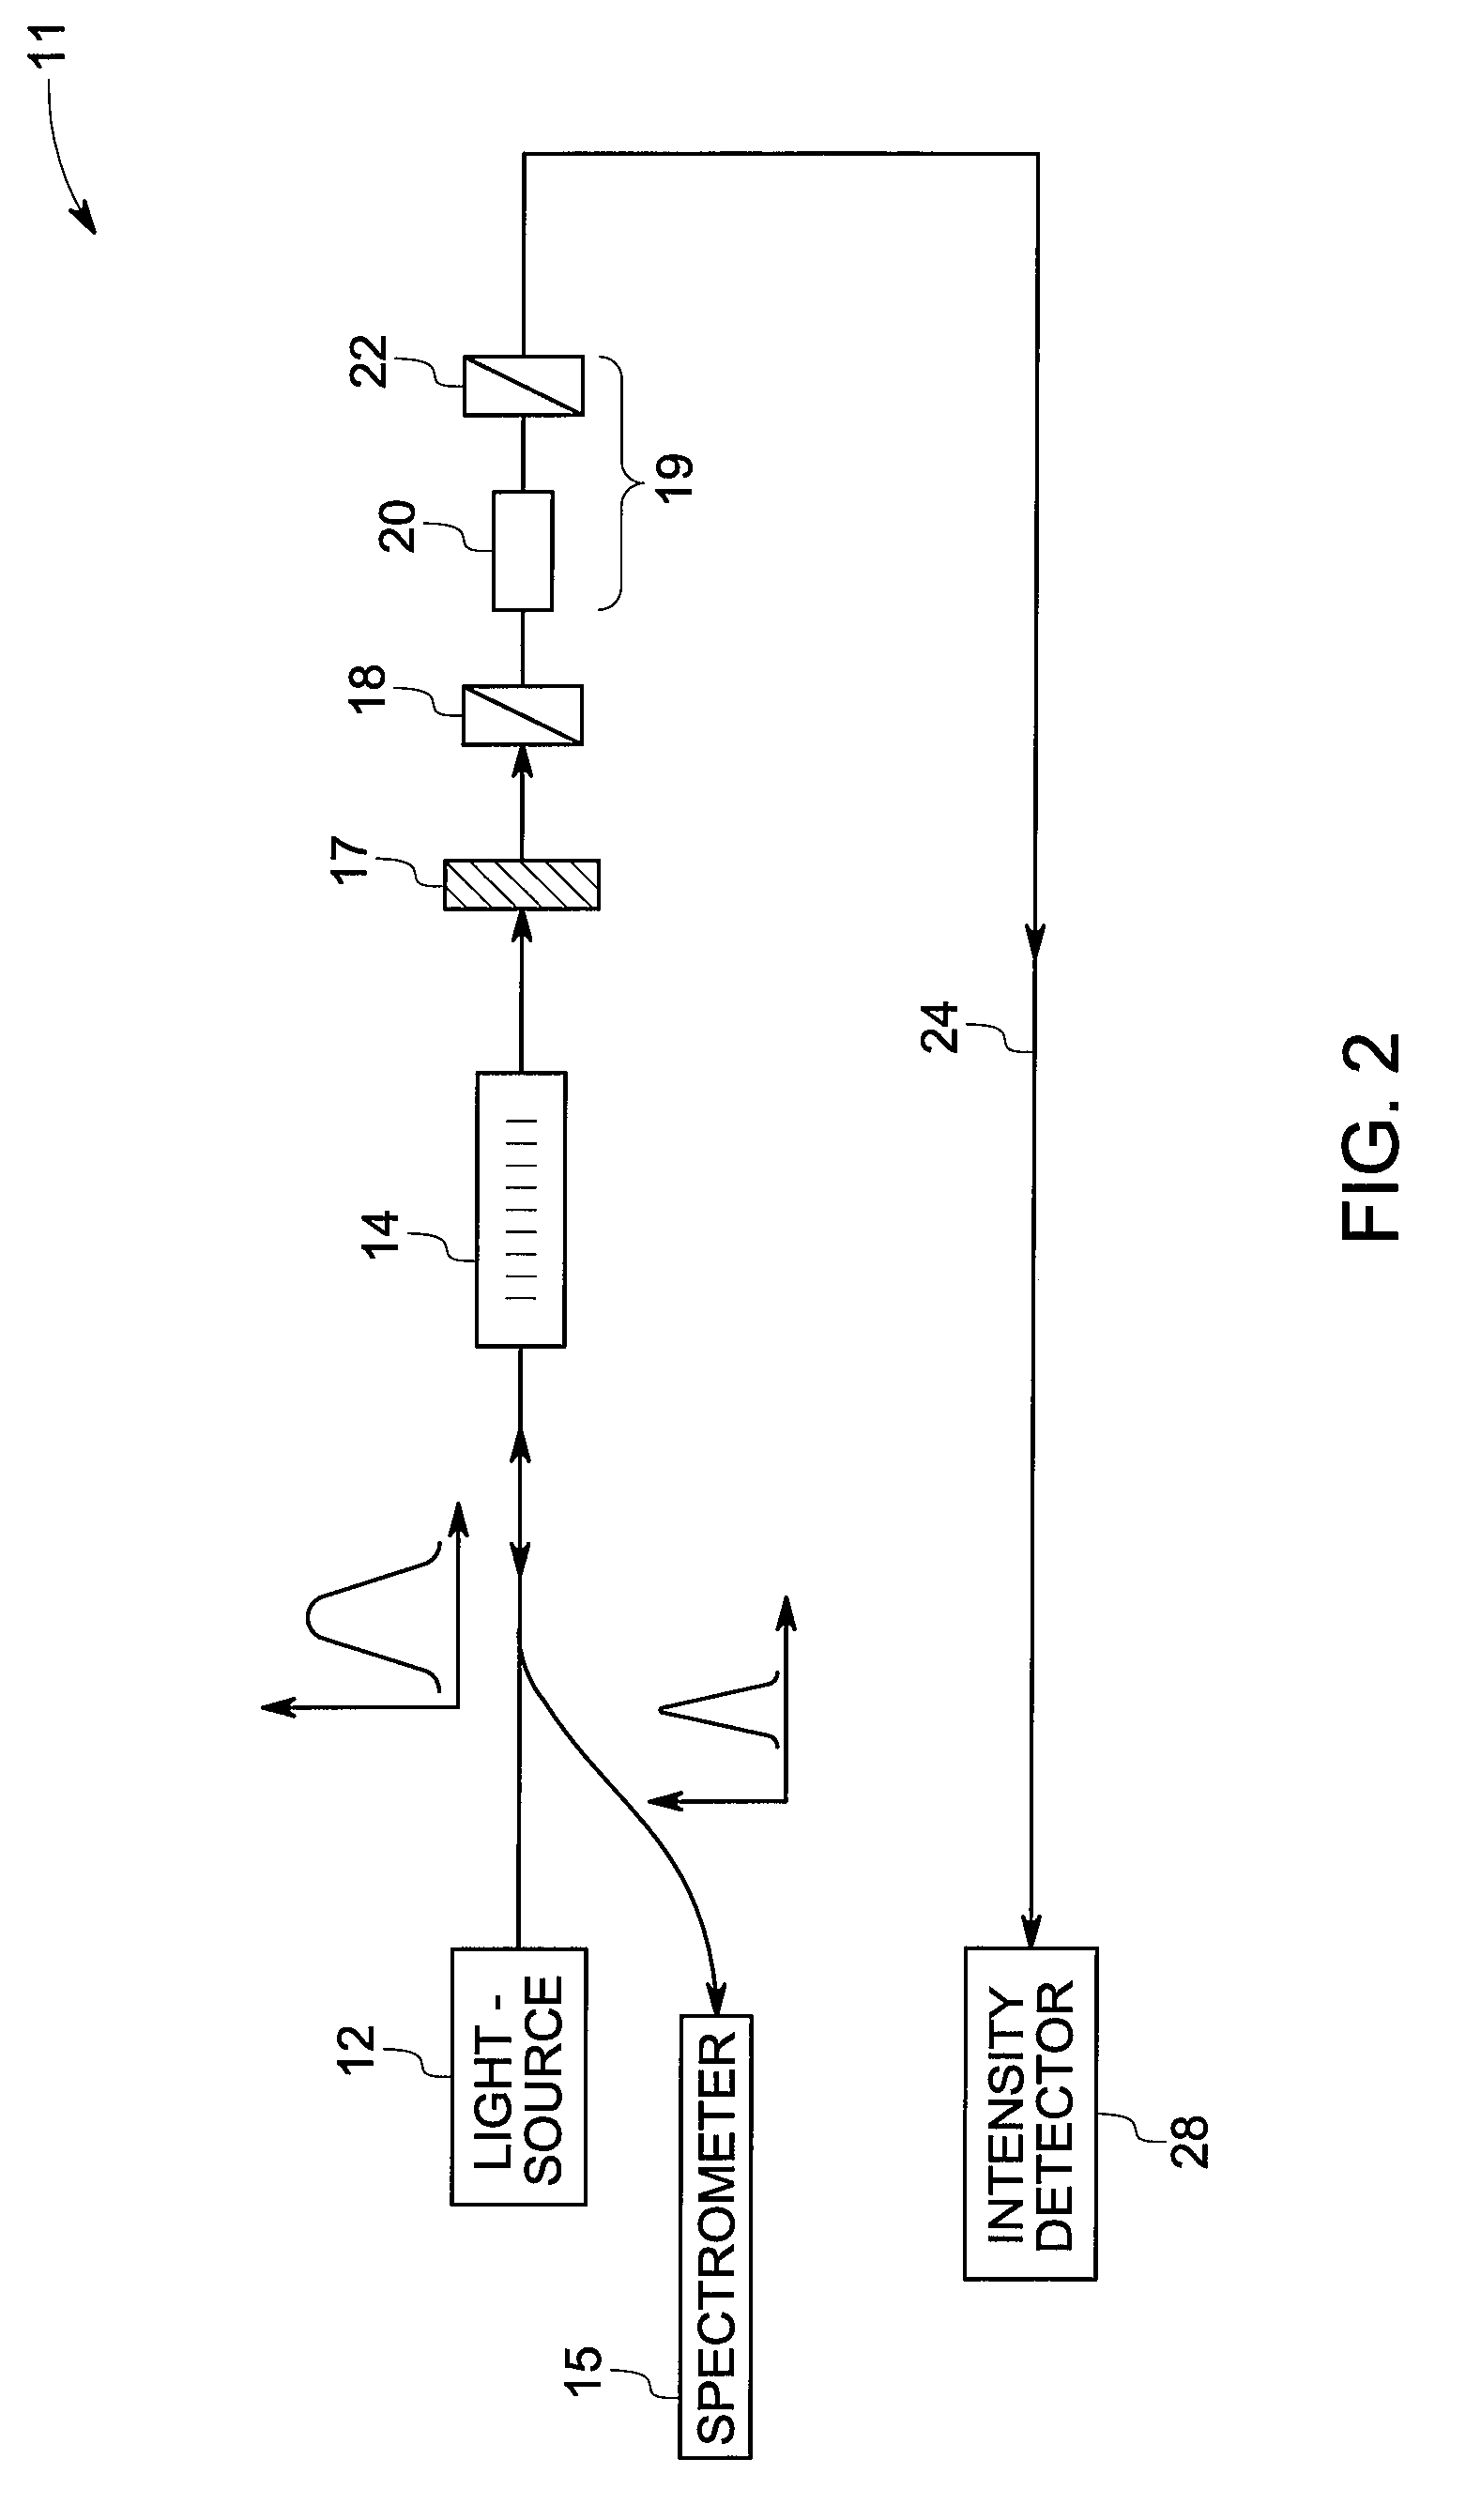 System and method for integrated measurement using optical sensors